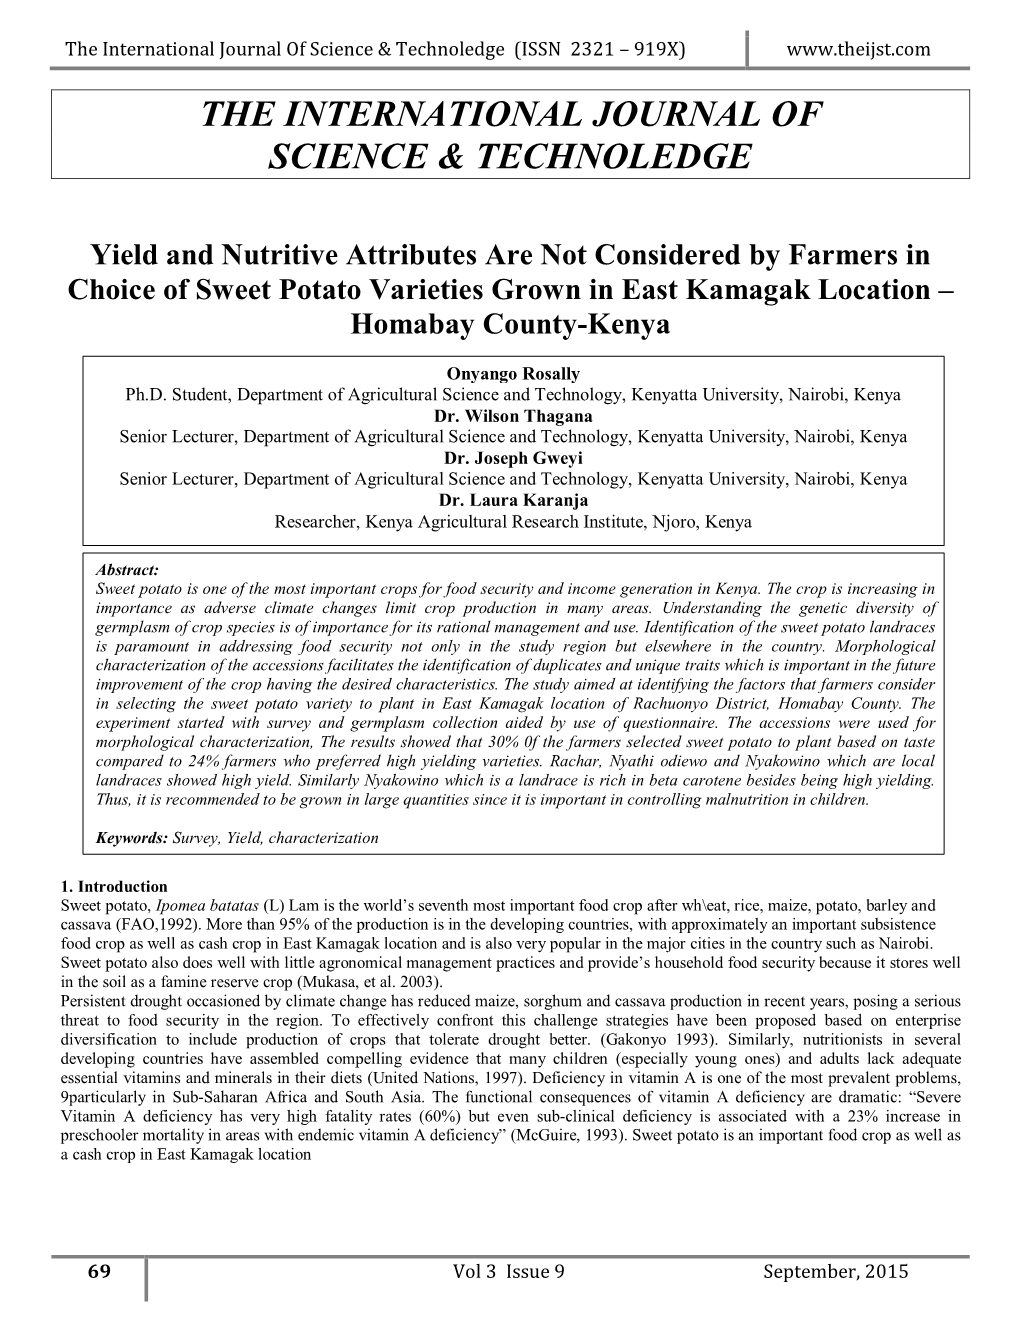 Yield and Nutritive Attributes Are Not Considered by Farmers in Choice of Sweet Potato Varieties Grown in East Kamagak Location – Homabay County-Kenya